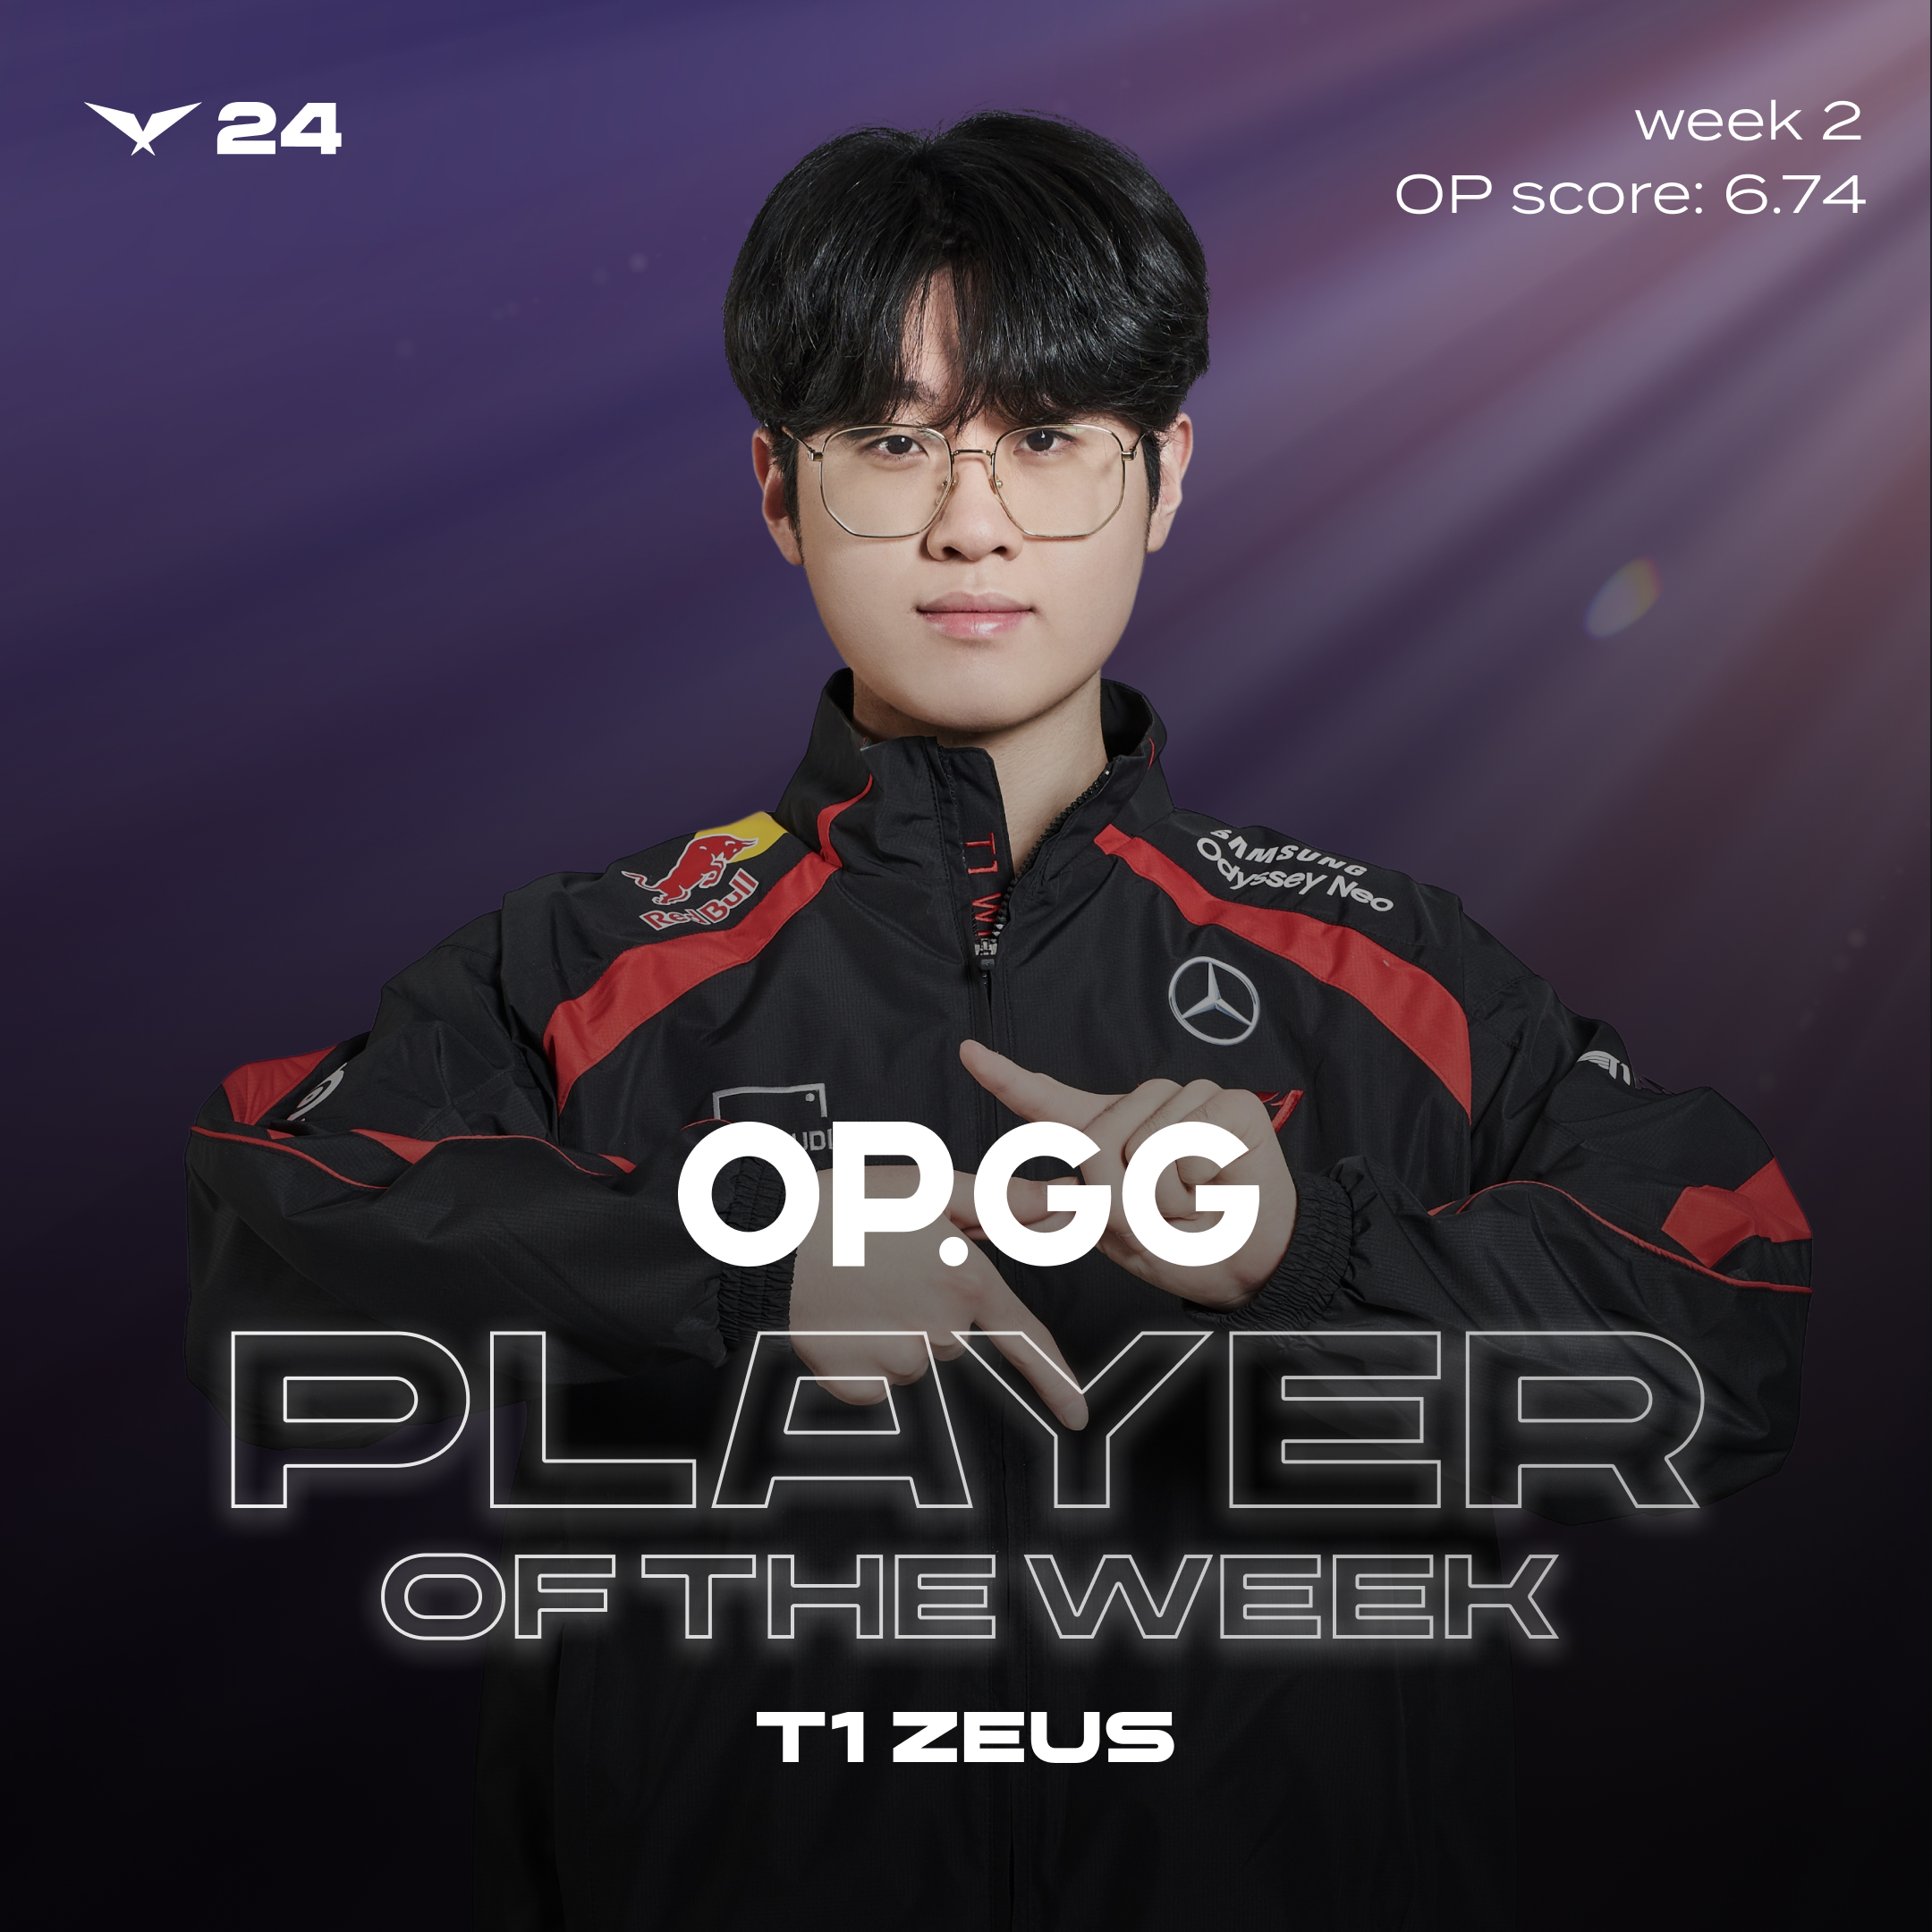 OP.GG on X: 🏆 Congratulations! The 2nd  Player of  the Week is T1 Zeus! 🏆 Stay tuned for an exclusive Zeus selfie, set to be  revealed only on  SNS next